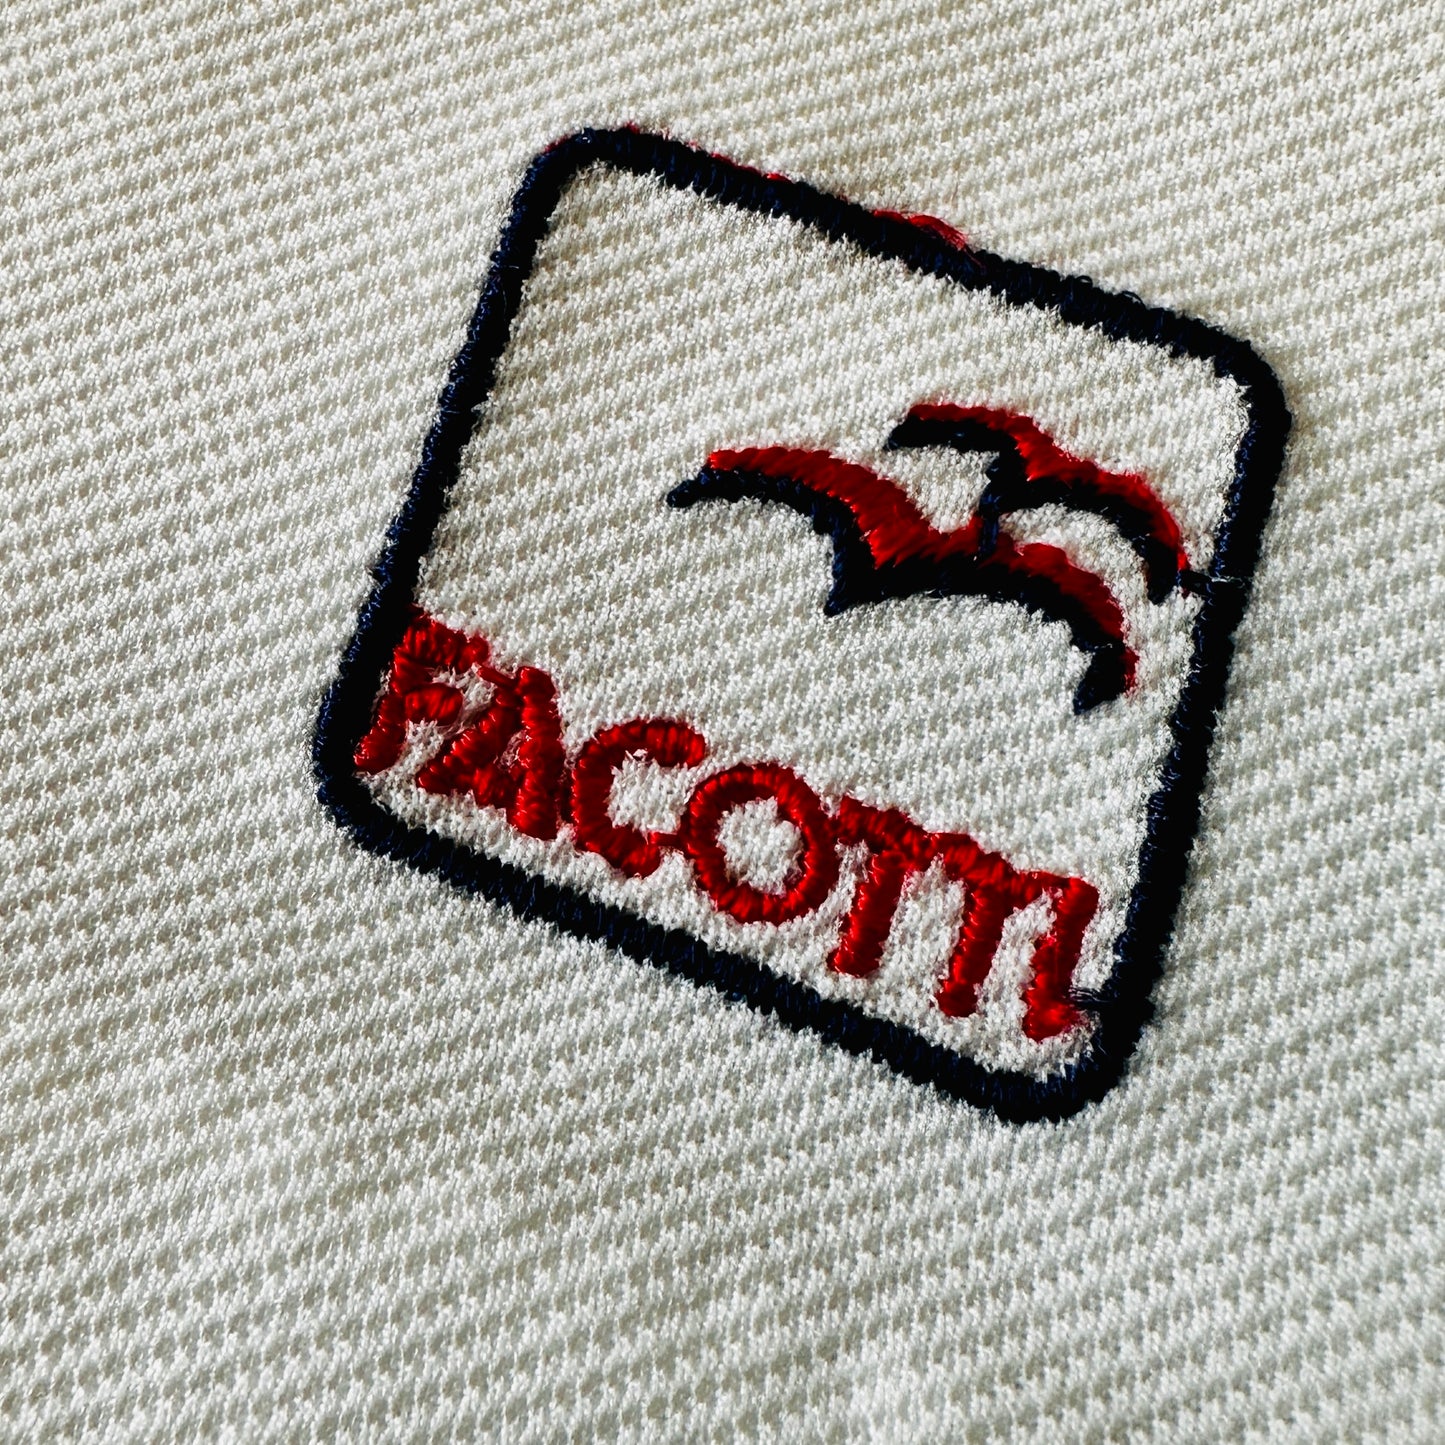 Facotti 80s Tennis Shorts - 54 - Made in Italy